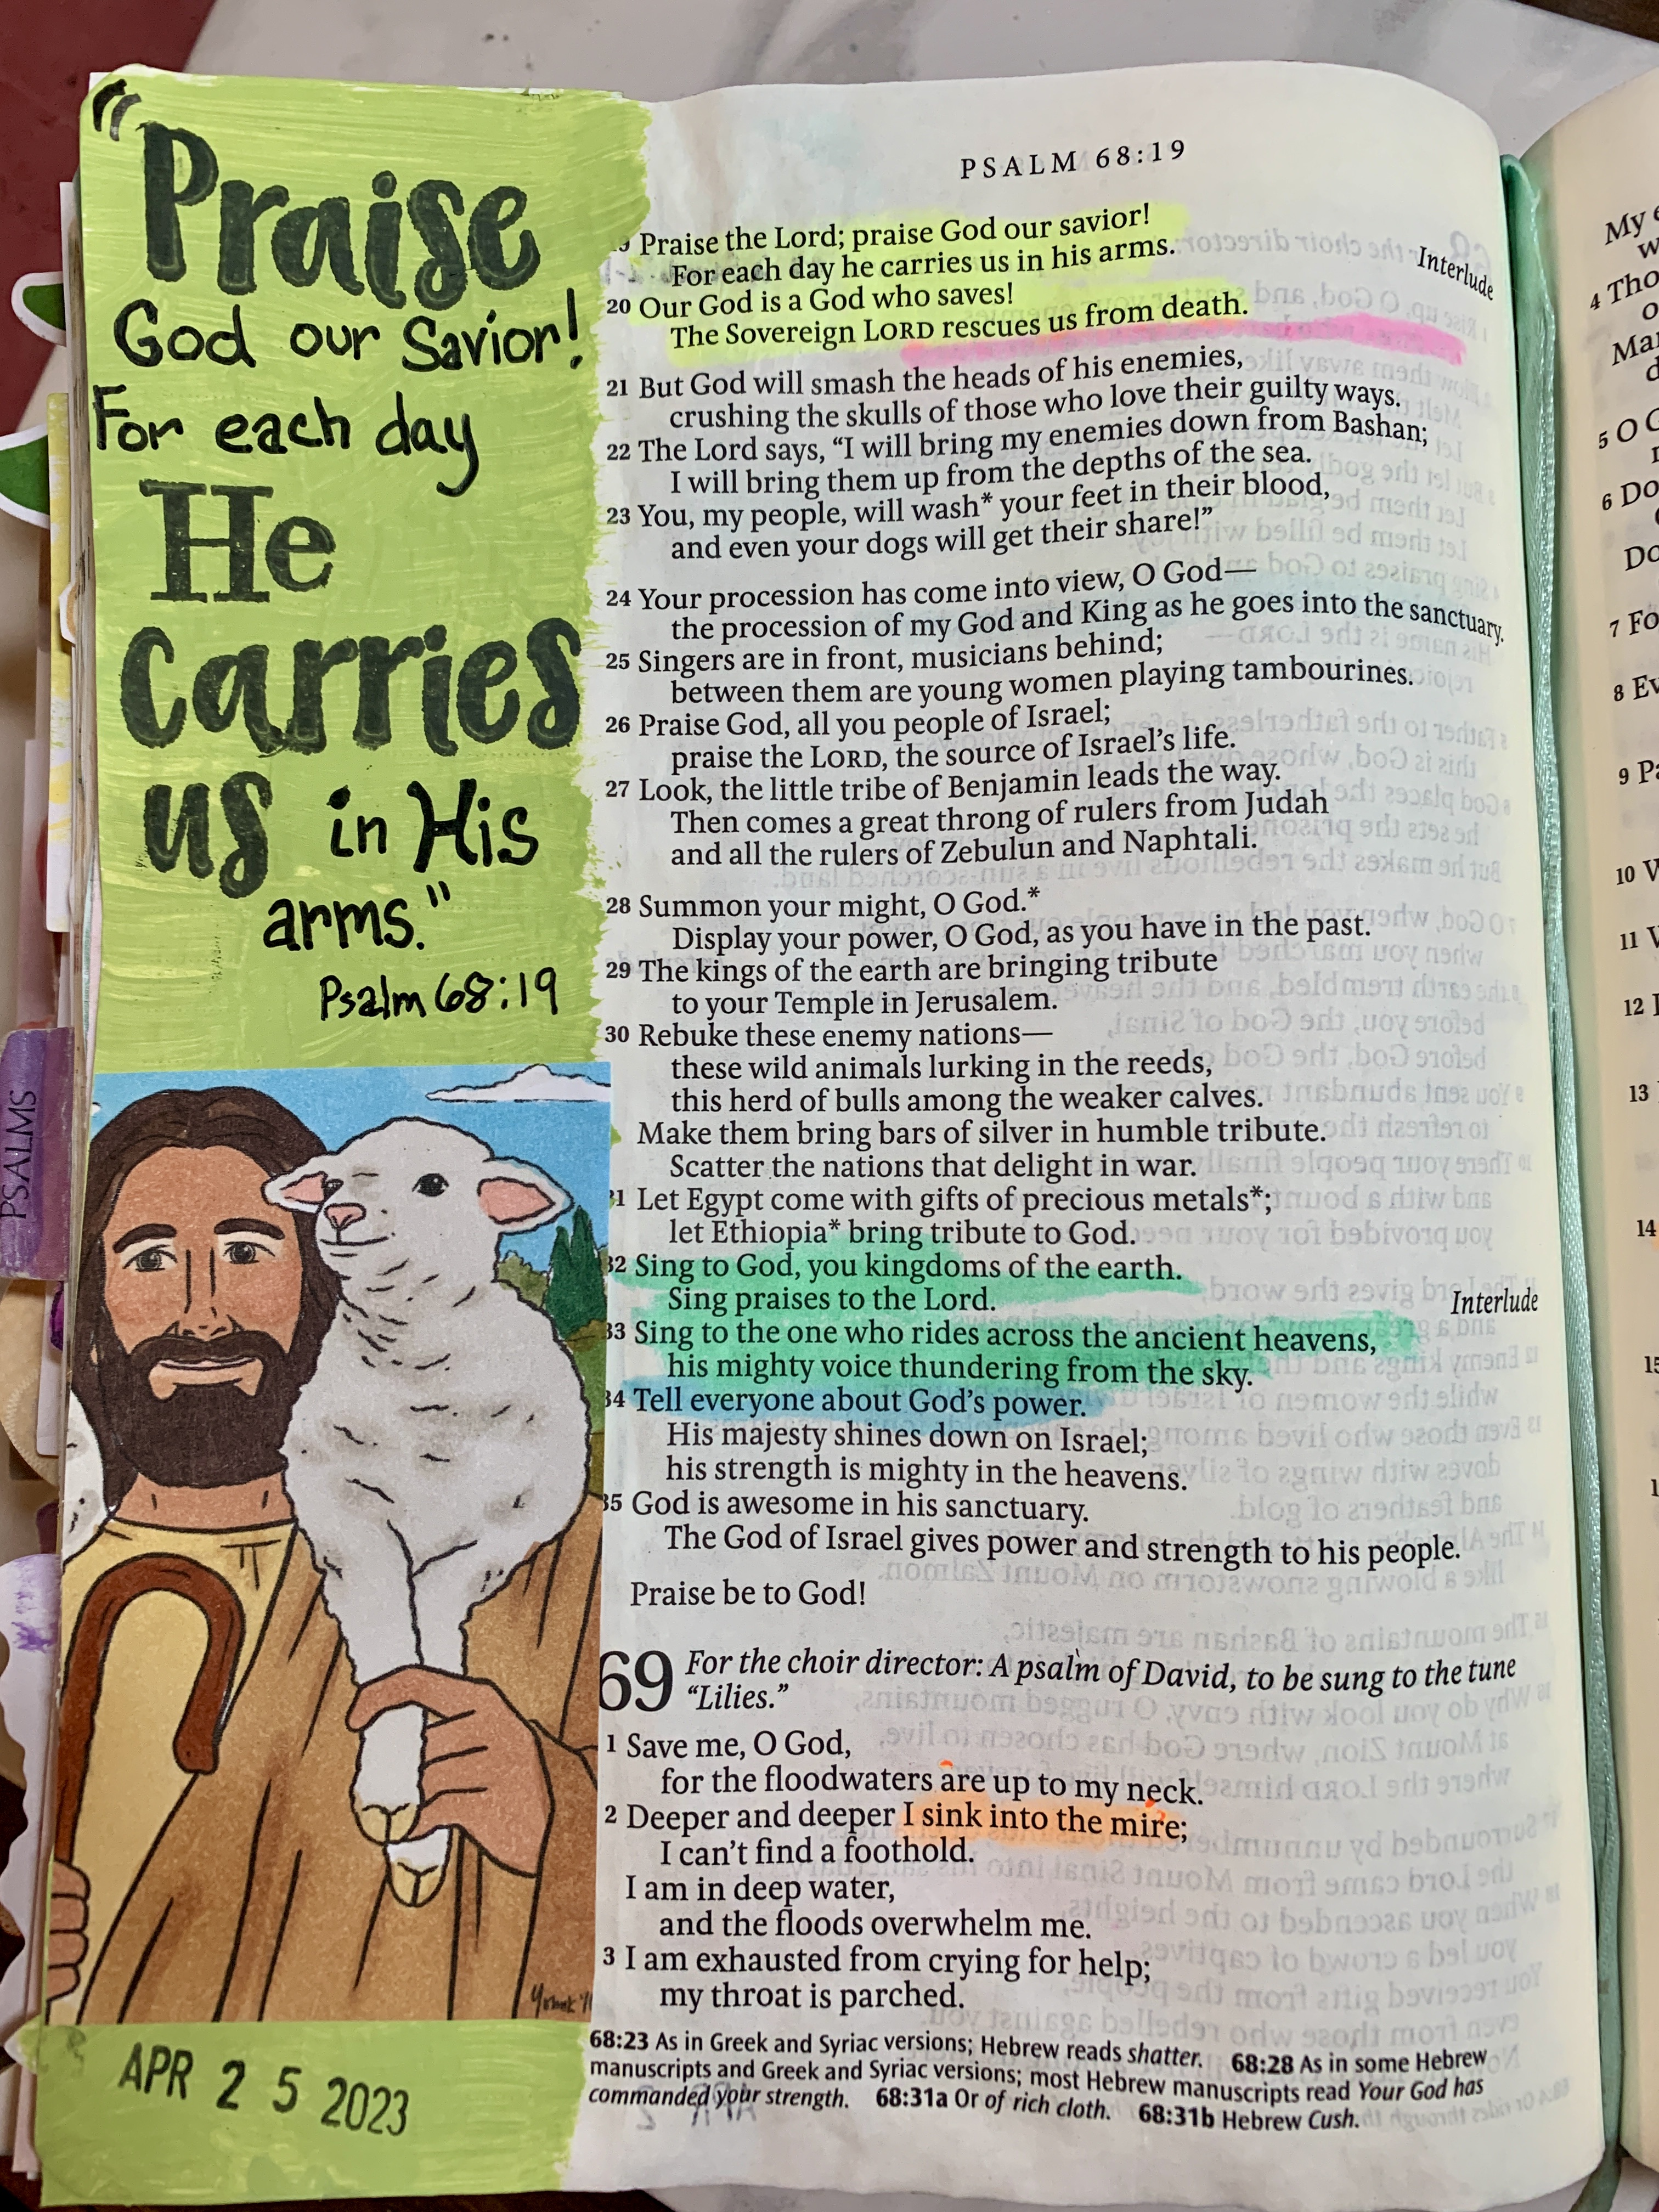 Amy's Creative Pursuits: Creative Bible Journaling - April Pages